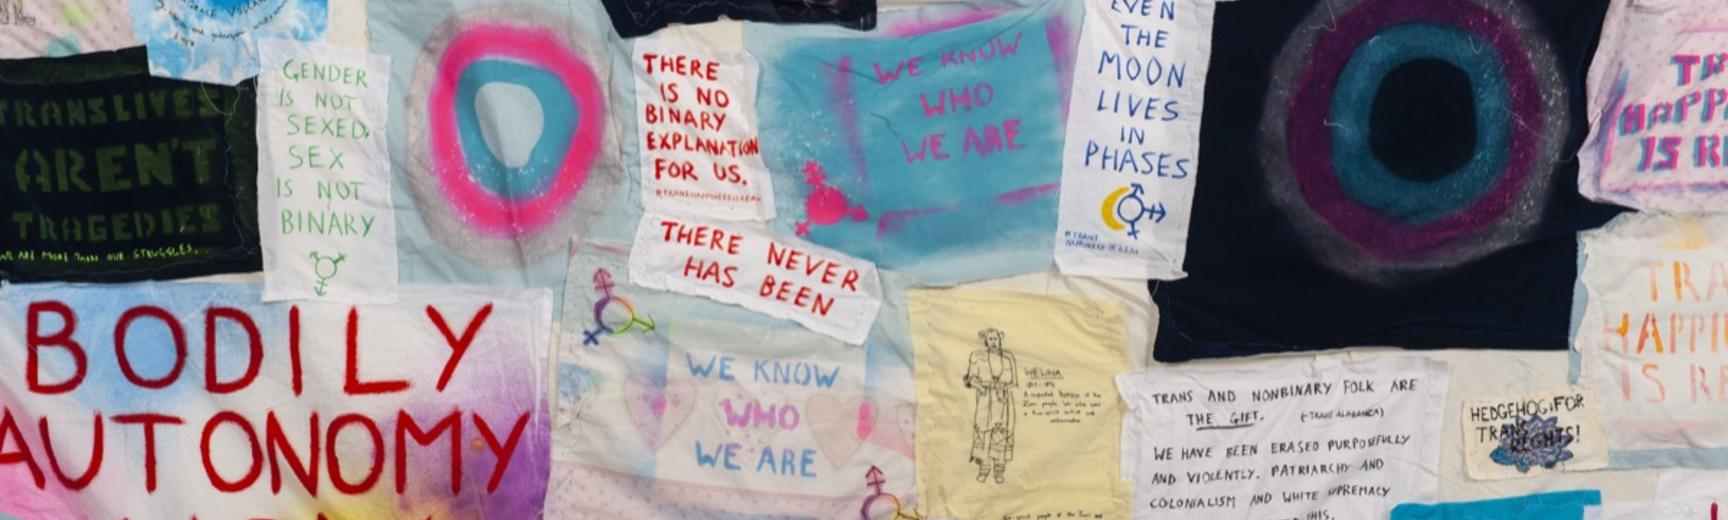 Large bed sheet with hand-printed, painted and drawn protest slogans attached, saying things like ‘trans happiness is real’ and ‘bodily autonomy now’.